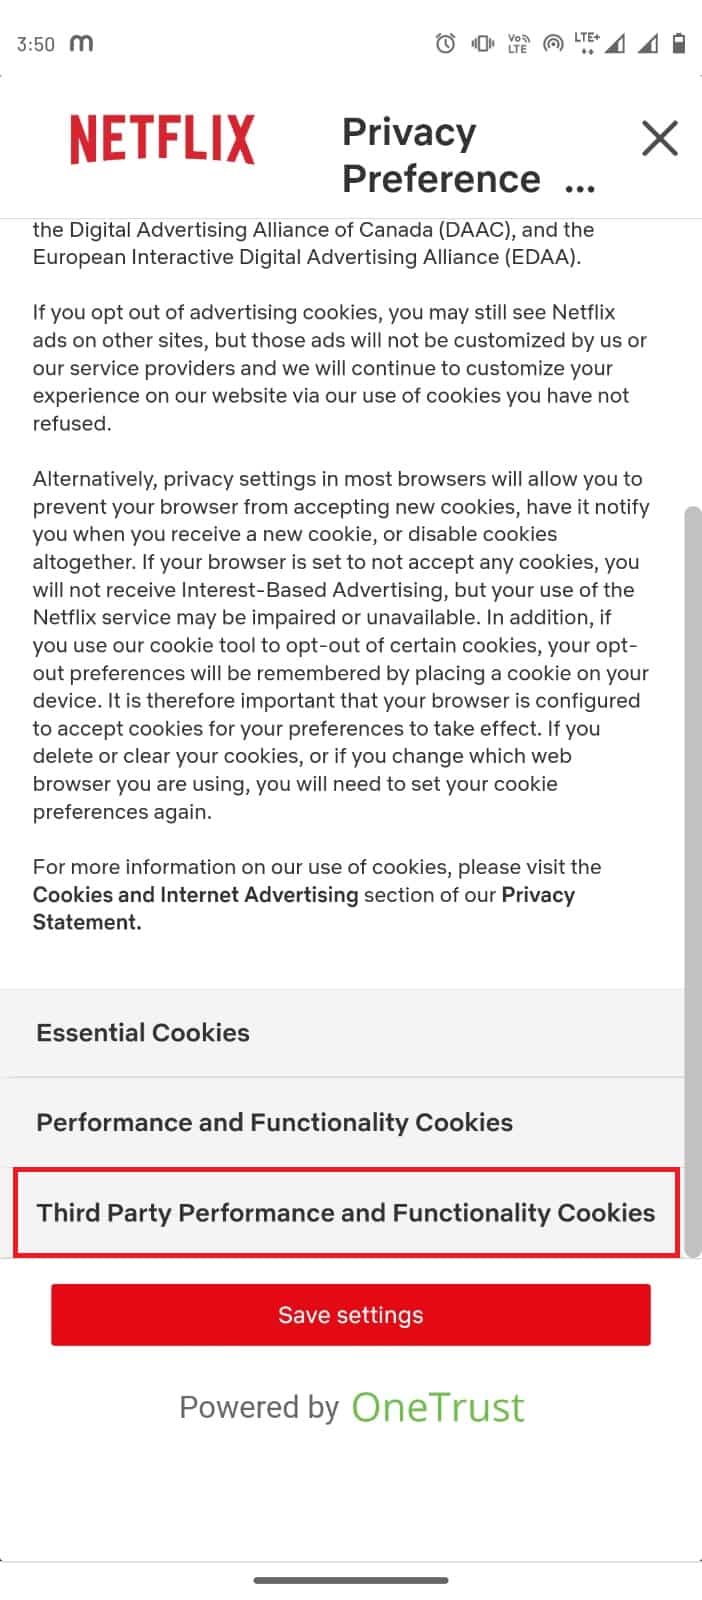 Tap on Third Party Performance and Functionality Cookies